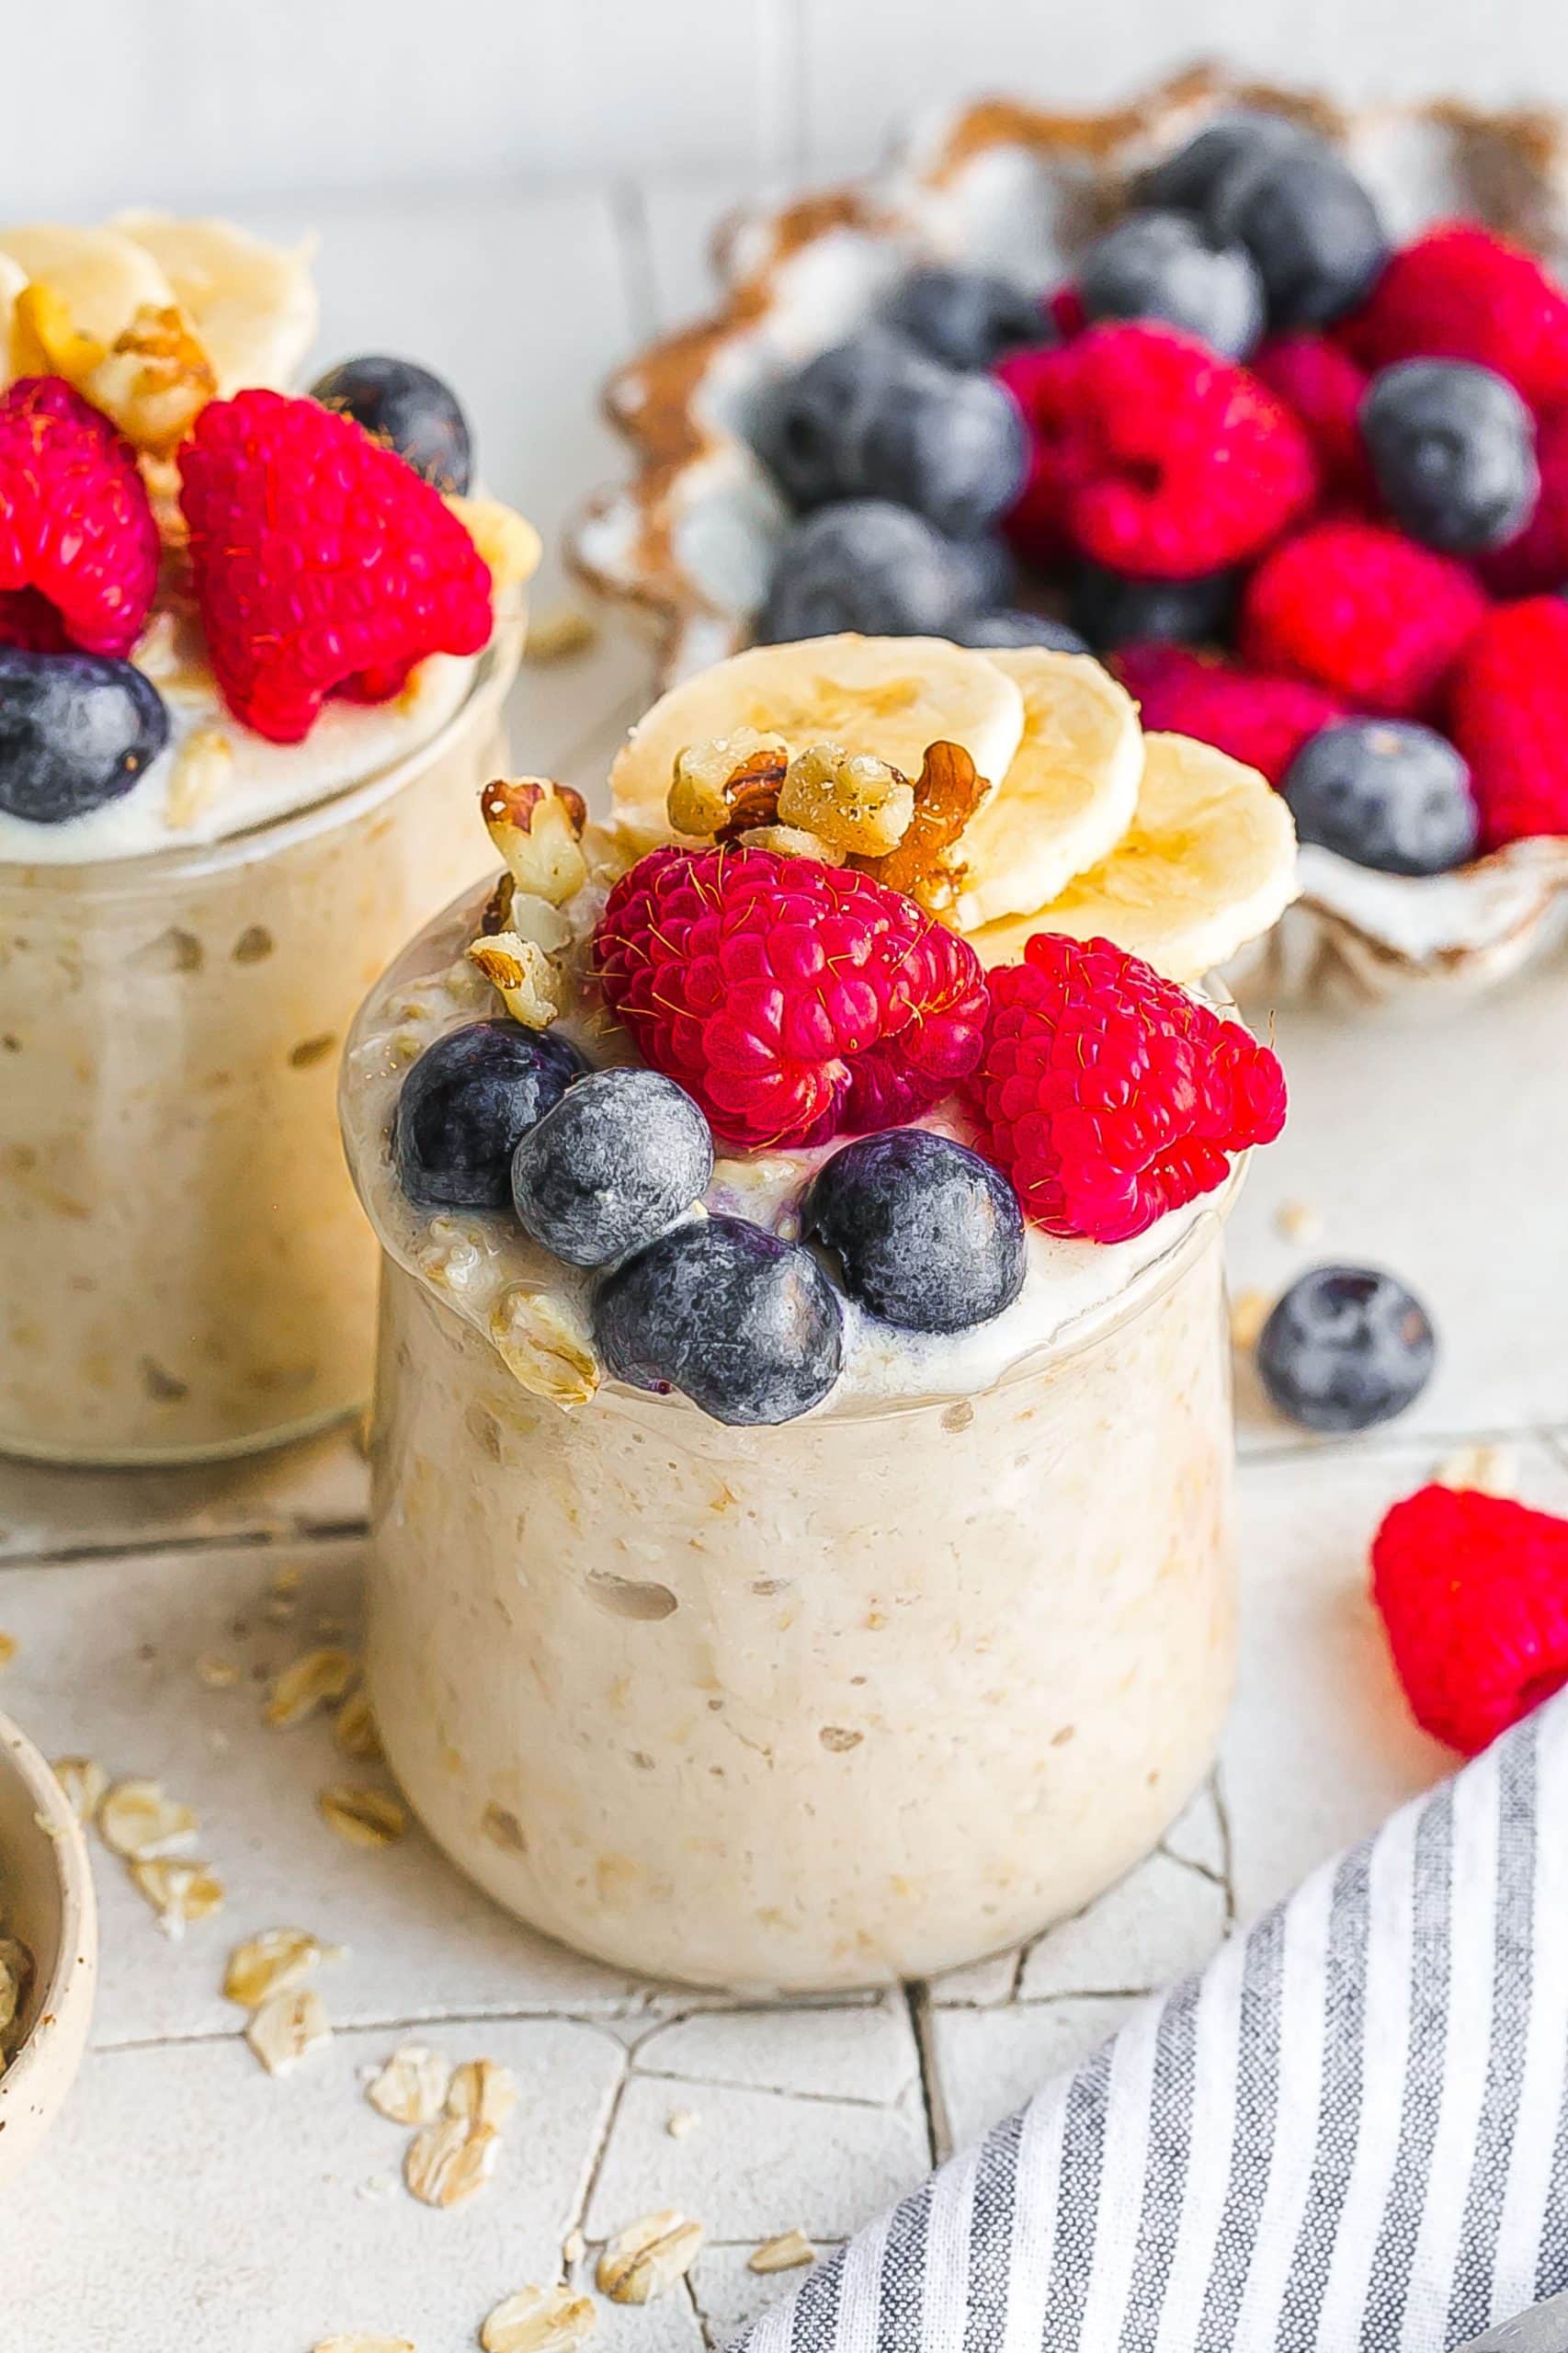 Overnight Oats With Almond Milk and berries in a small jar.